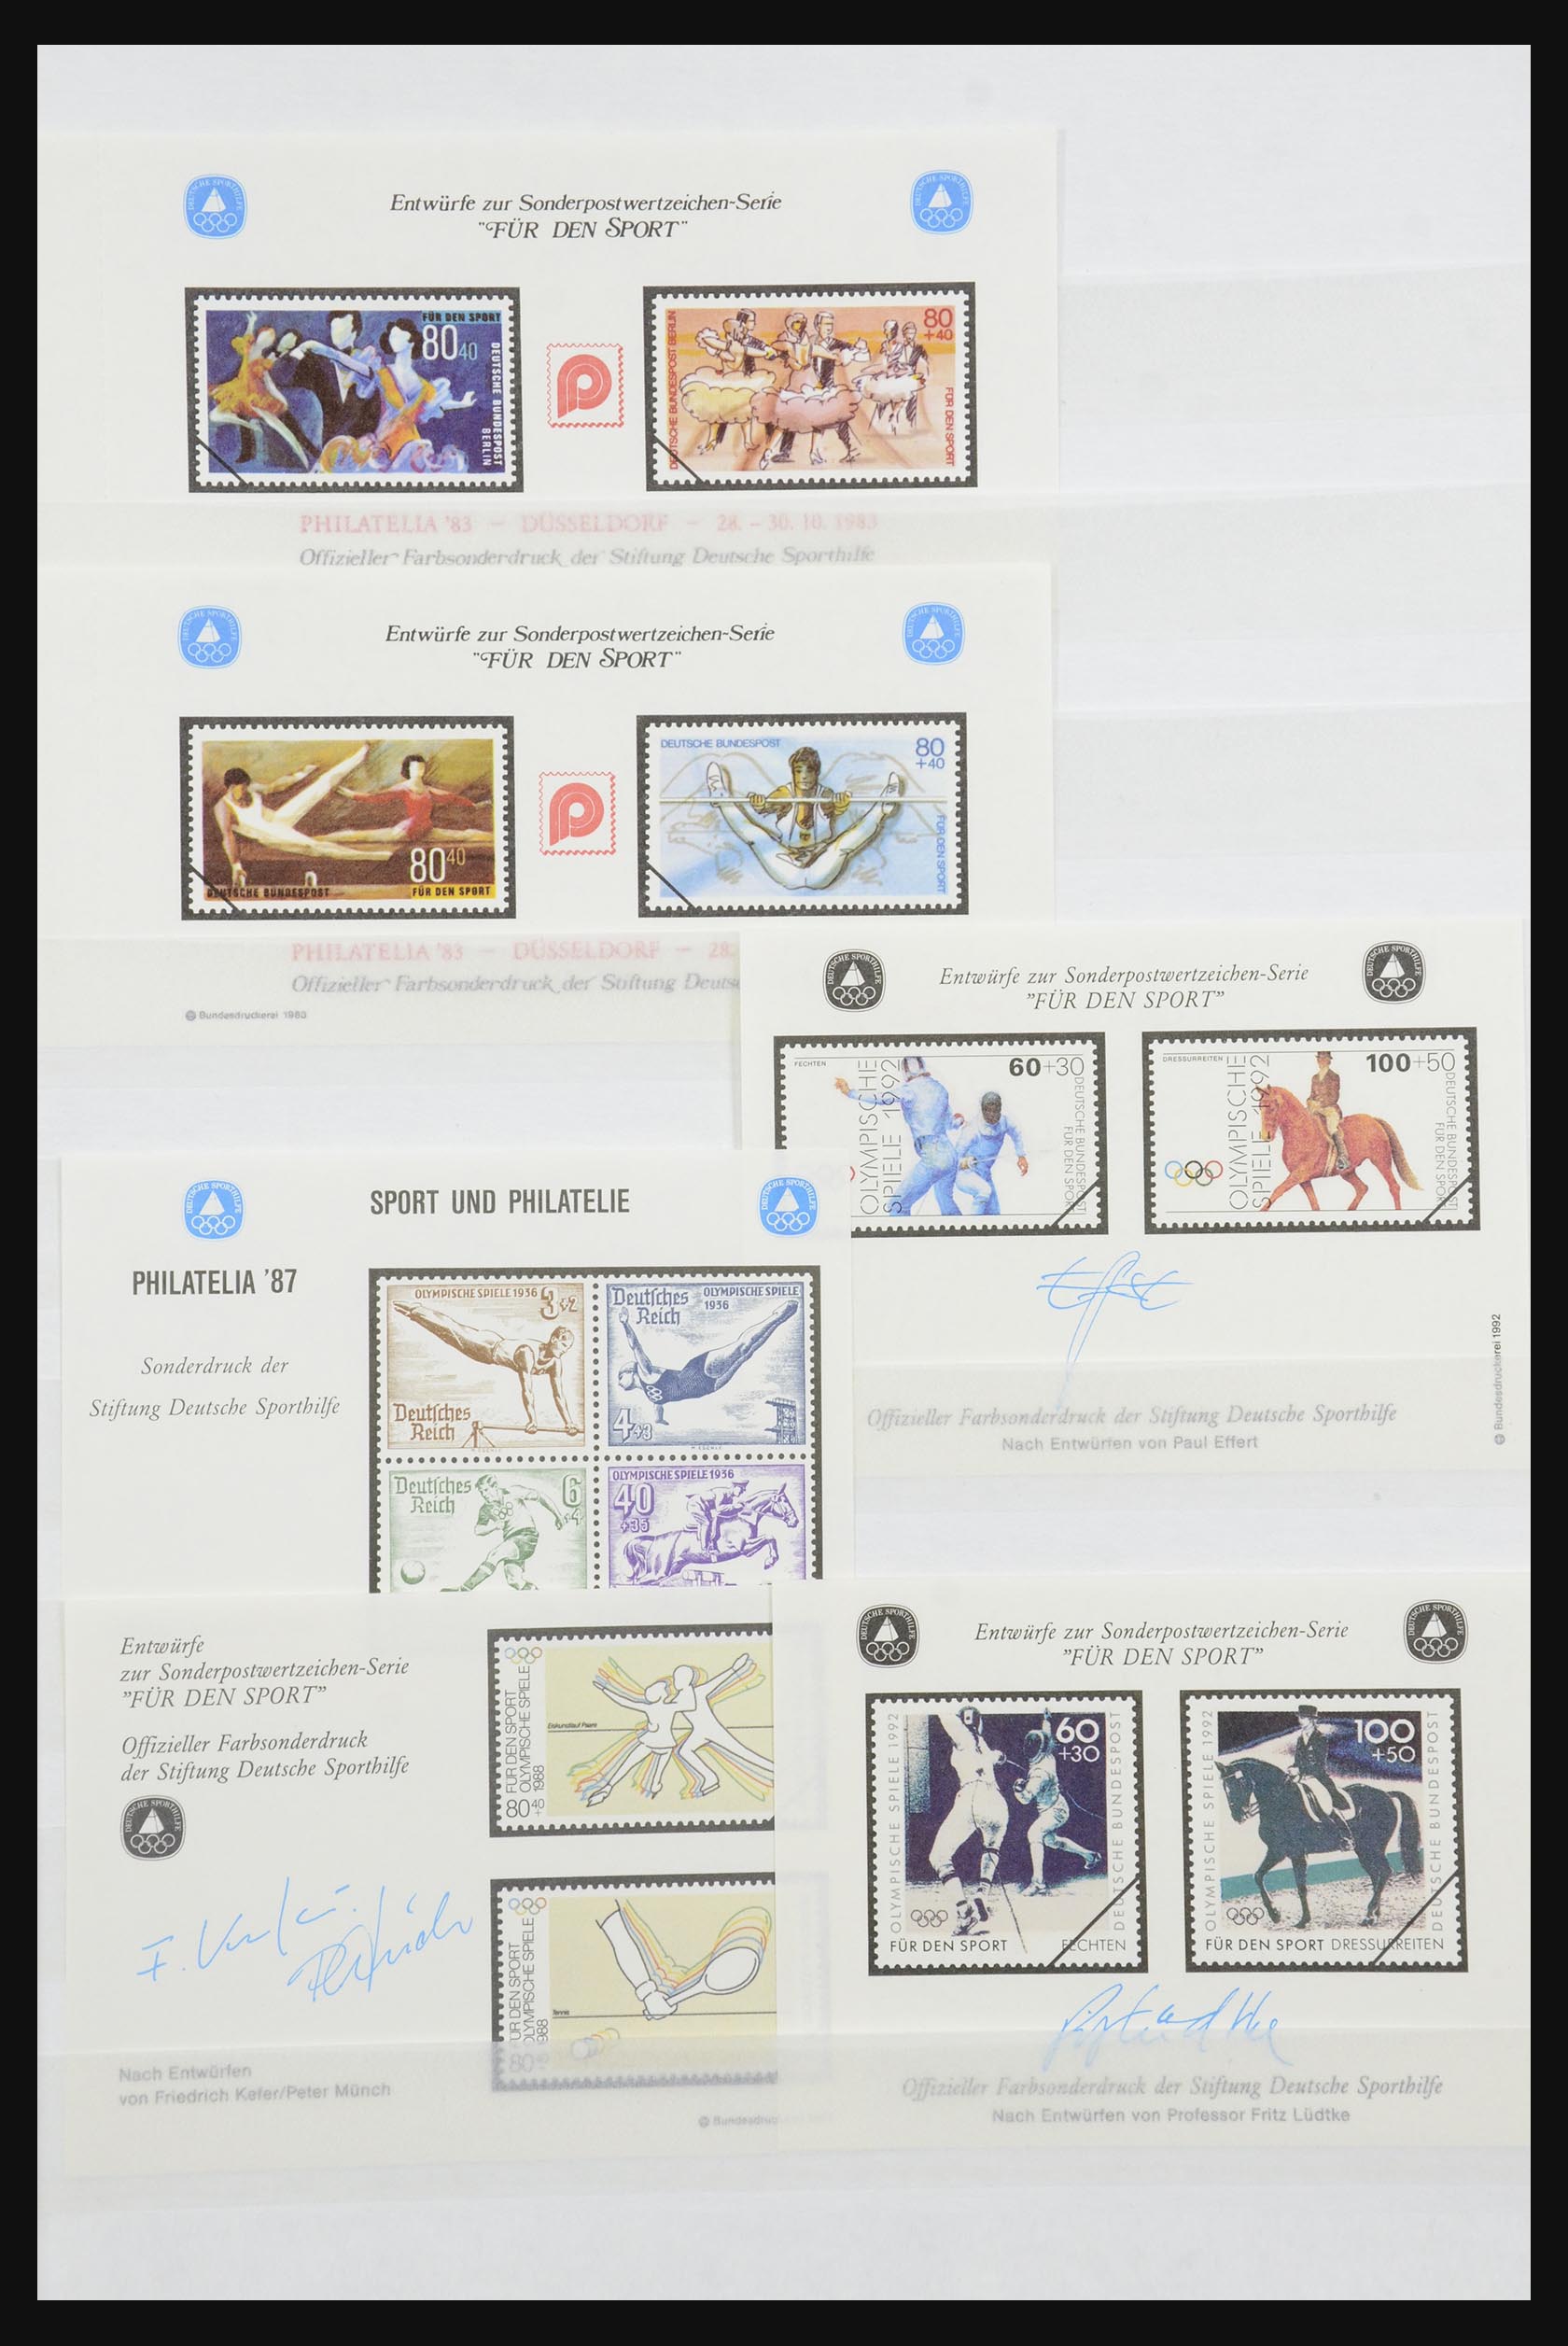 32050 011 - 32050 Bundespost special sheets 1980-2010.